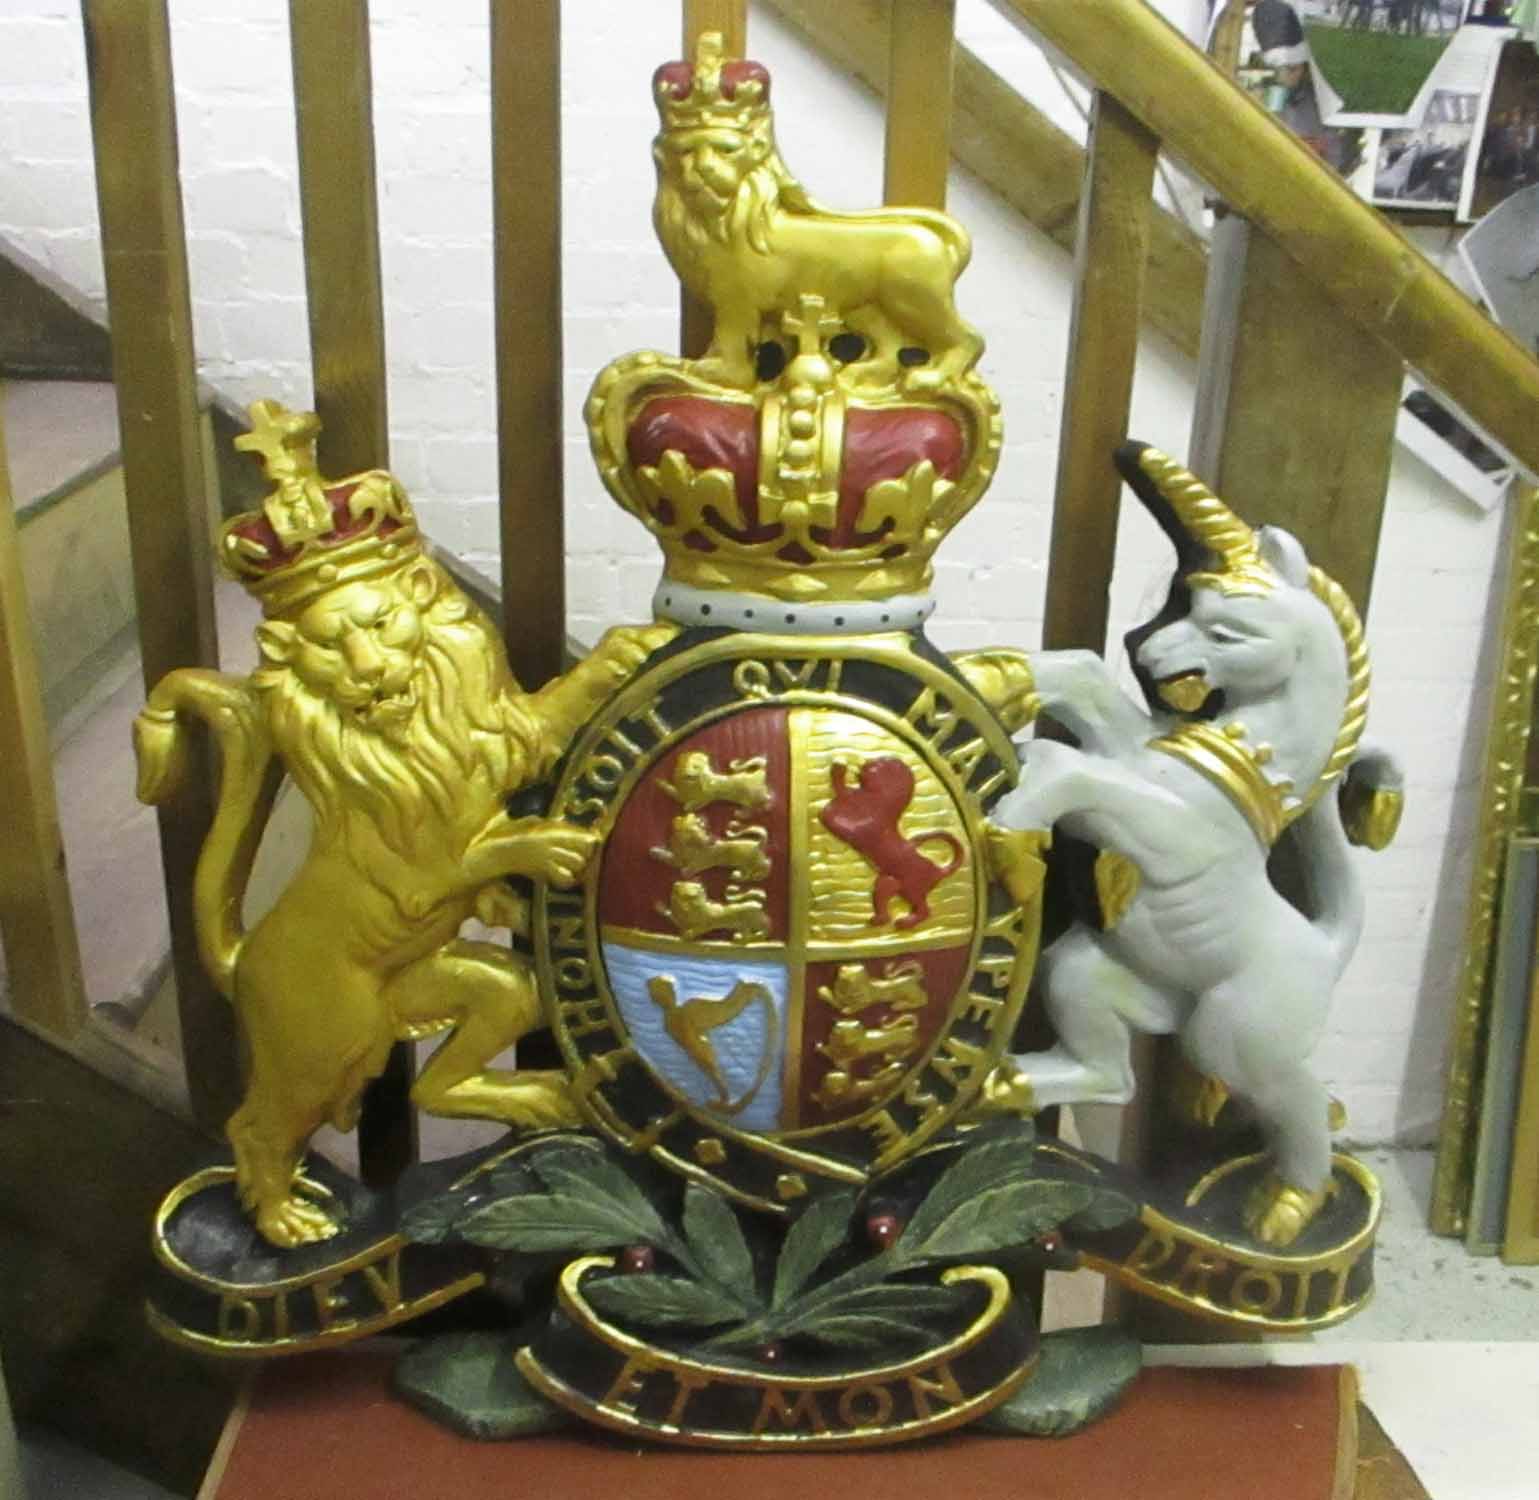 ROYAL COAT OF ARMS, in a polychrome finish, 70cm W x 75cm H.